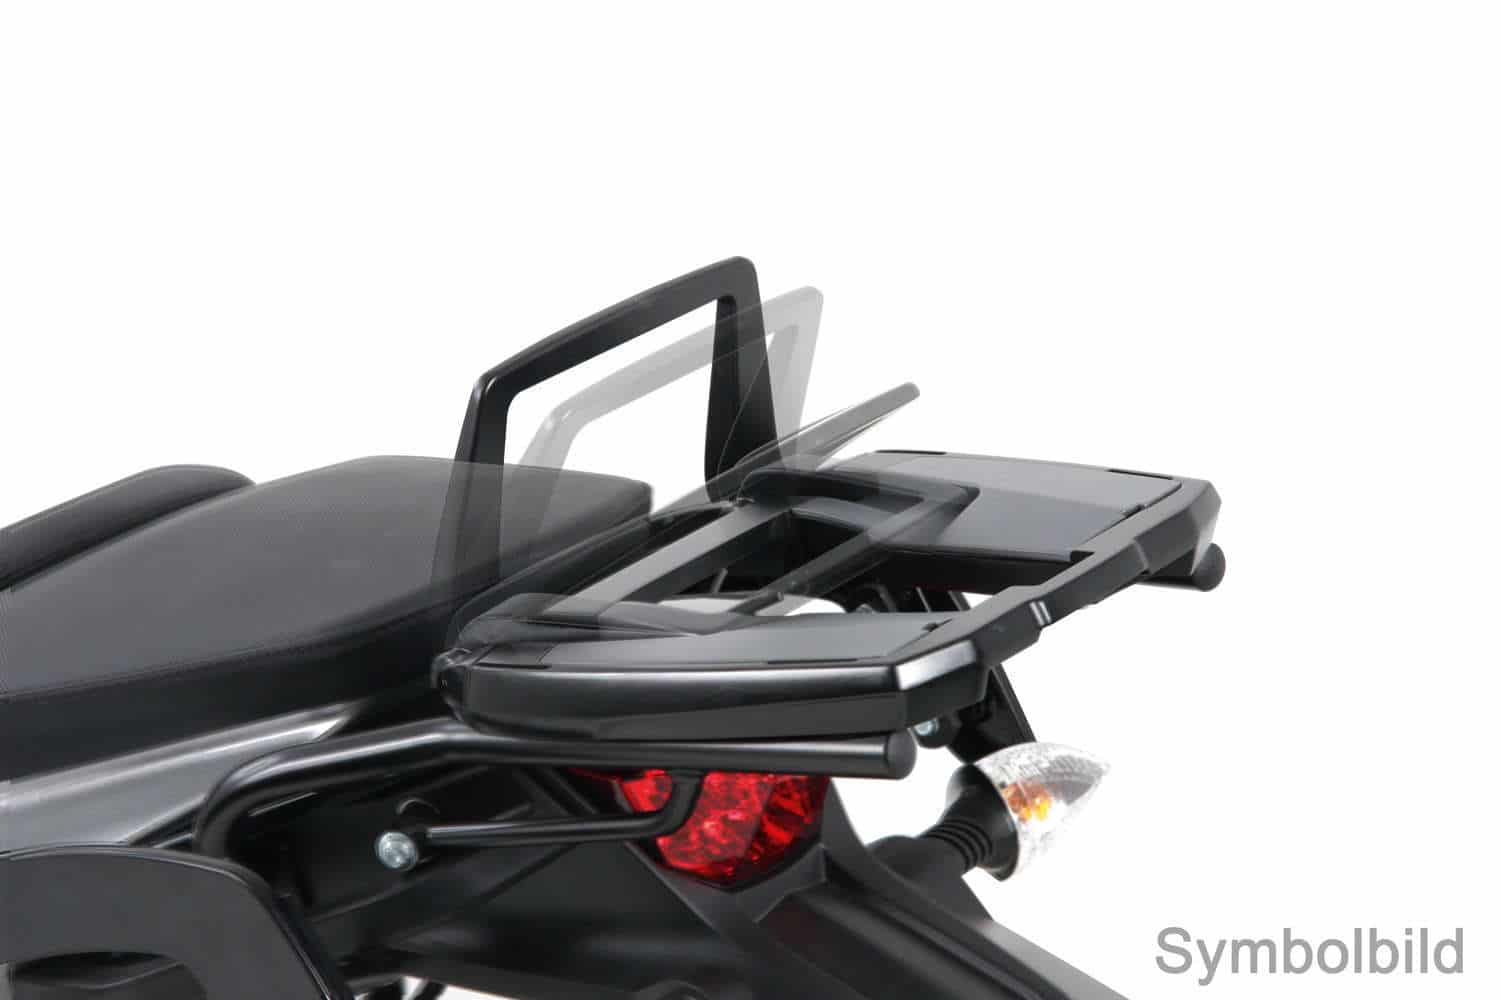 Easyrack topcasecarrier black for BMW F 650 GS Twin (2008-2011)/F 700 GS (2012-2017)